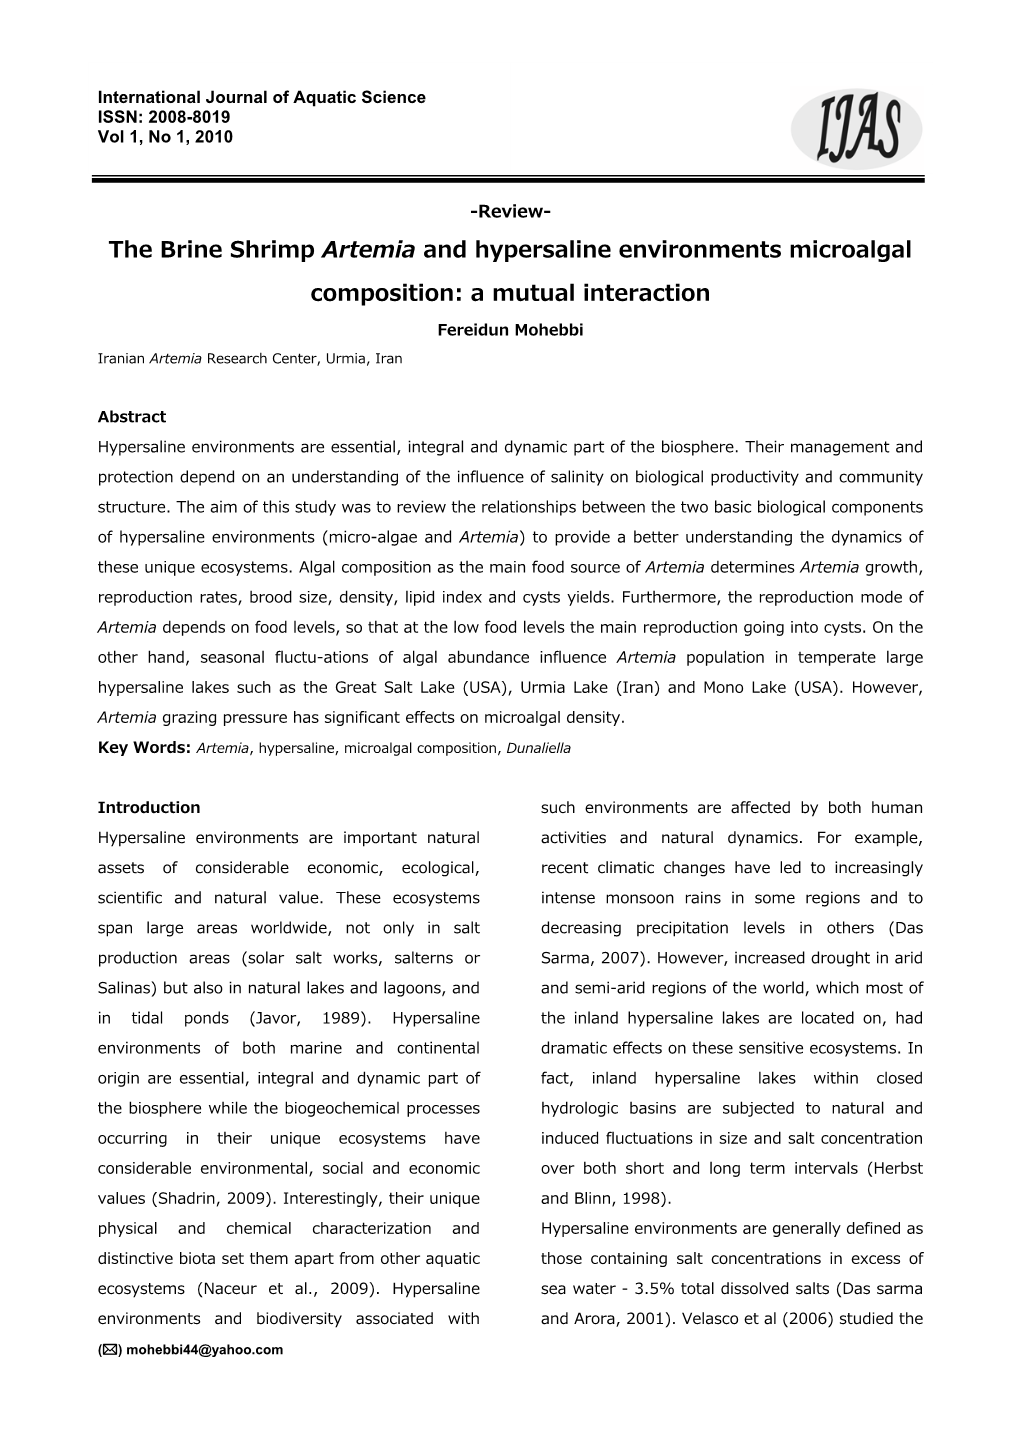 The Brine Shrimp Artemia and Hypersaline Environments Microalgal Composition: a Mutual Interaction